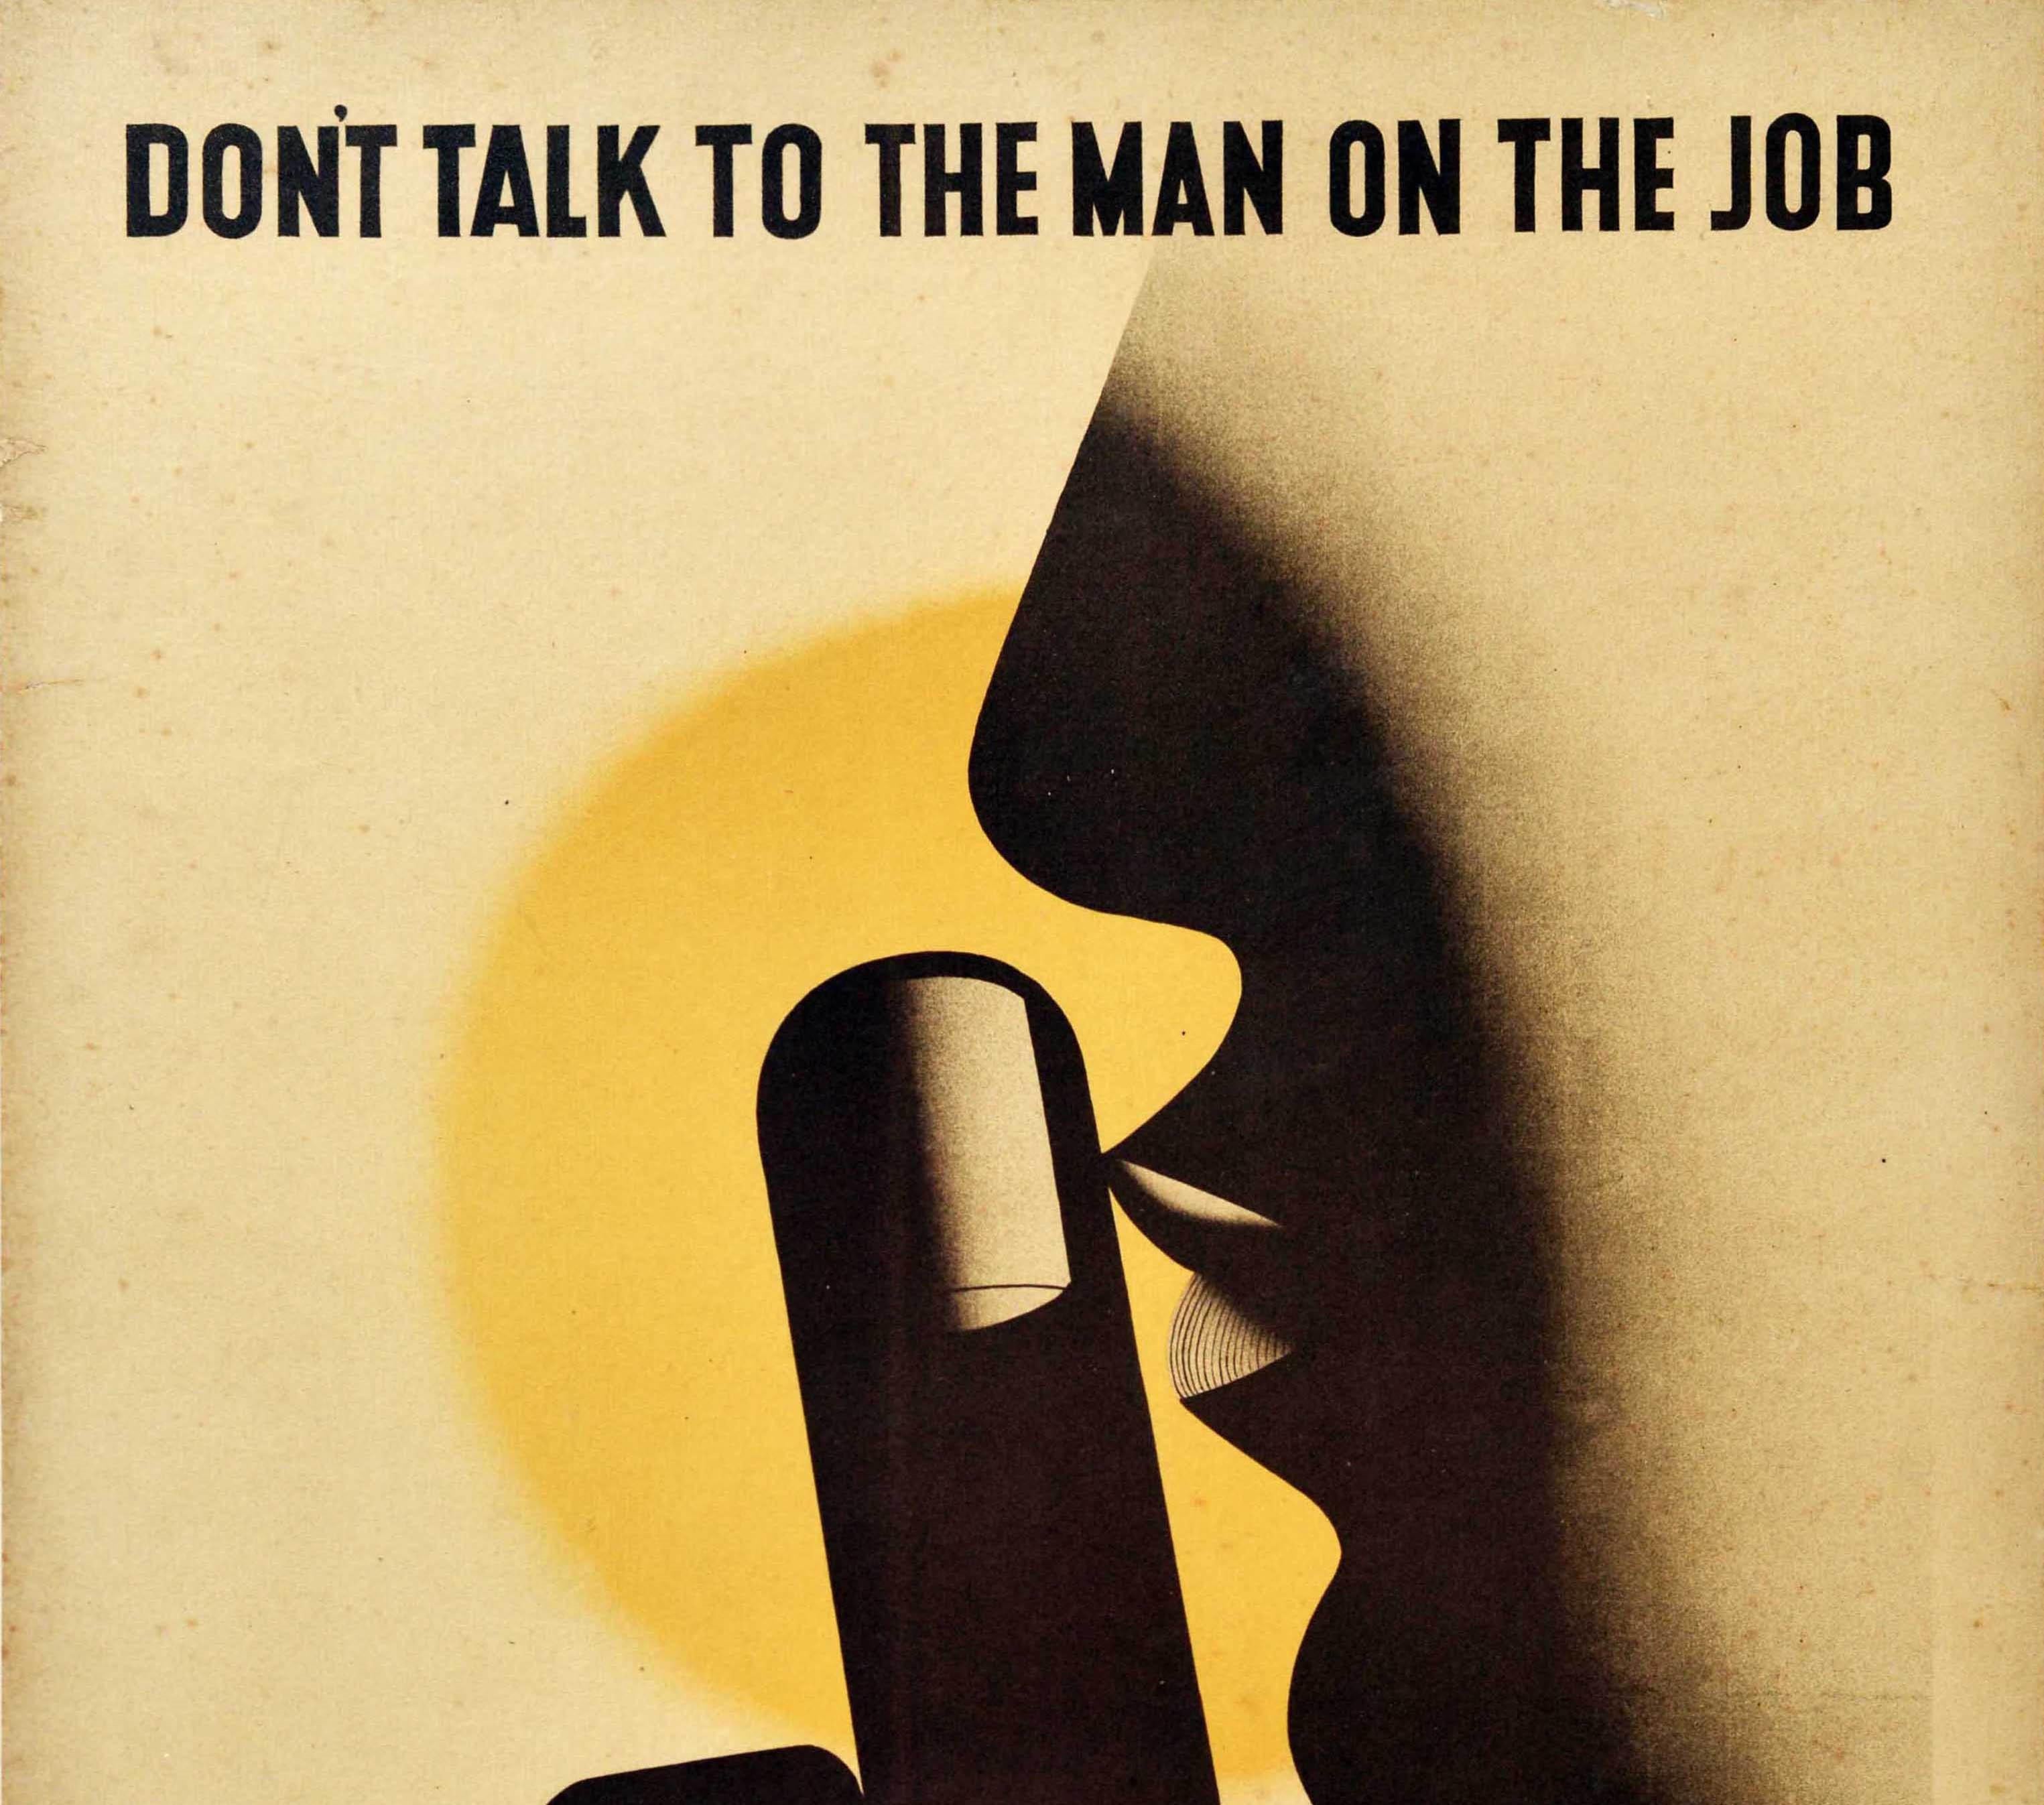 Original vintage health and safety poster - Don't talk to the man on the job - featuring a great design by the notable artist duo Tom Eckersley (1914-1997) and Eric Lombers (1914-1978) depicting a man with his finger at his mouth indicating the need